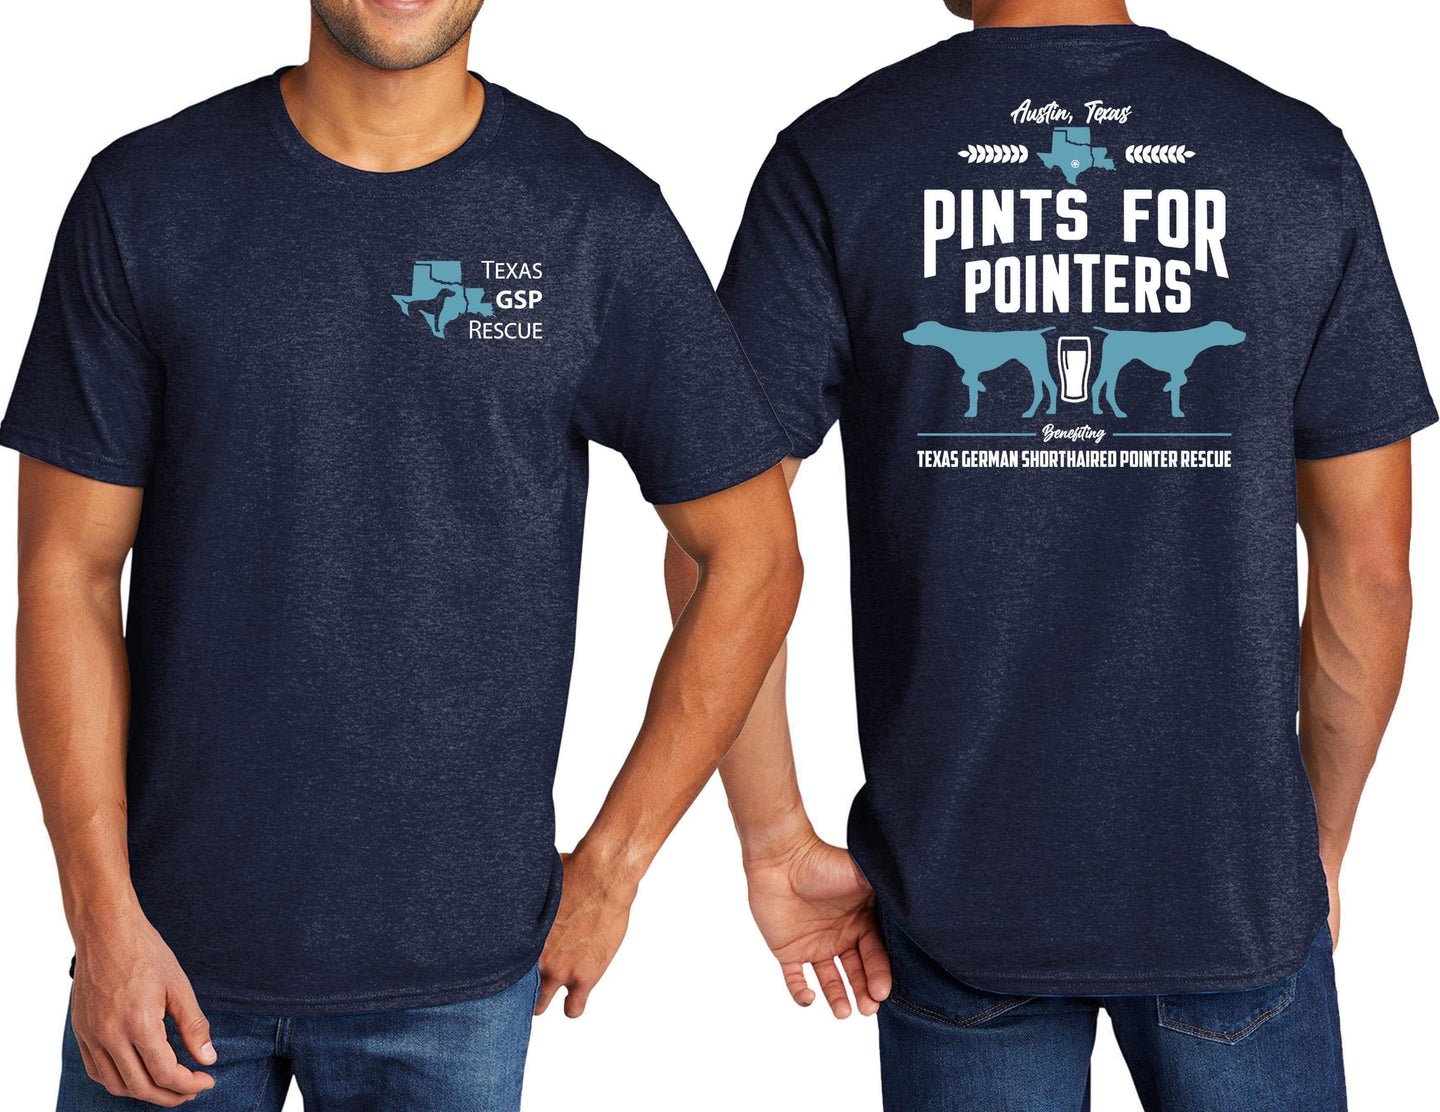 Austin Pints for Pointers Tee (Sz Small)